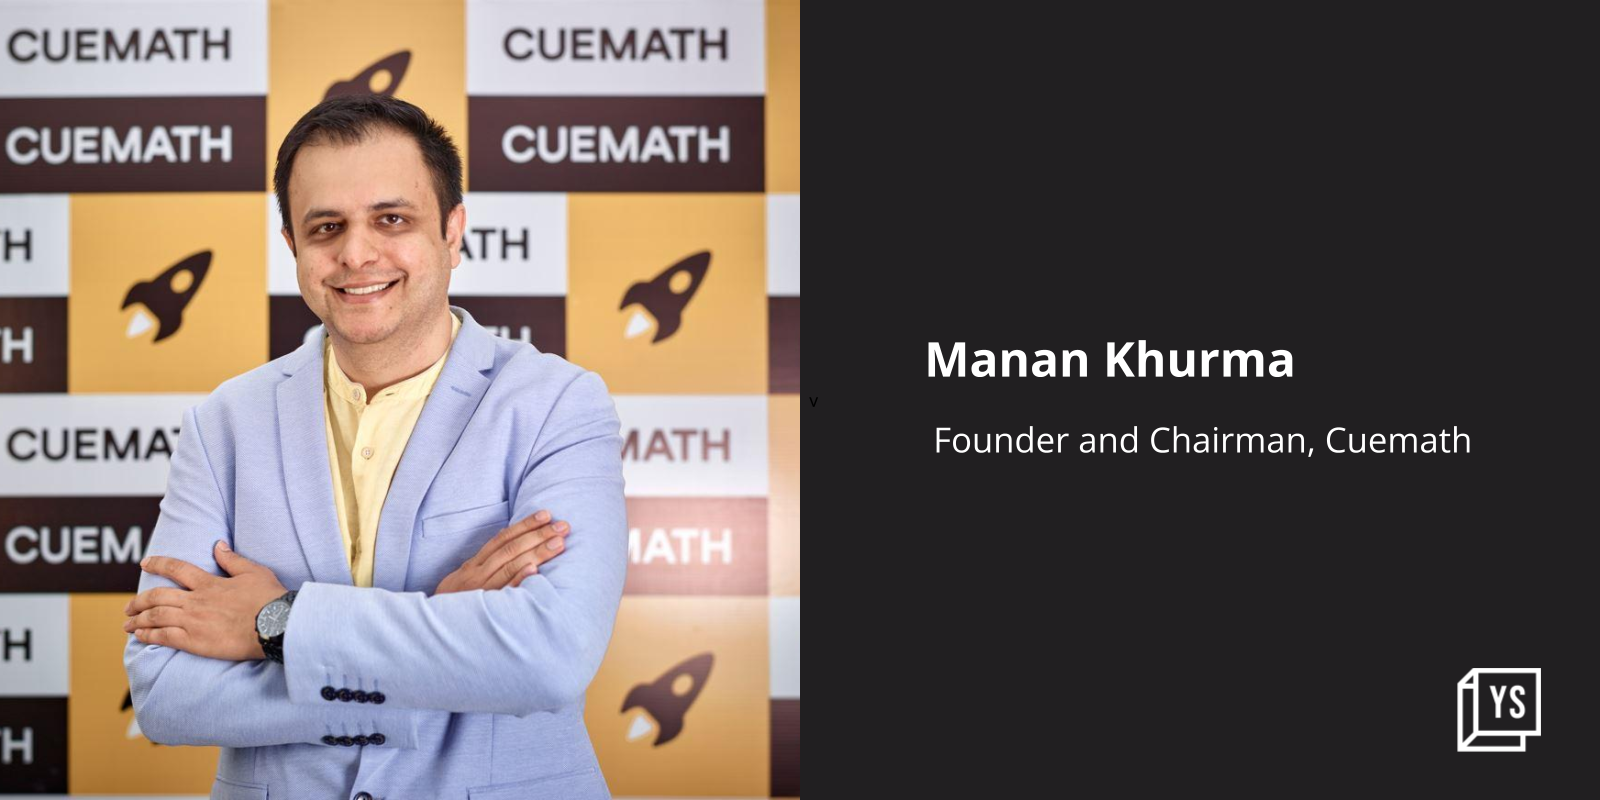 An enduring love for maths led Manan Khurma to launch edtech startup Cuemath